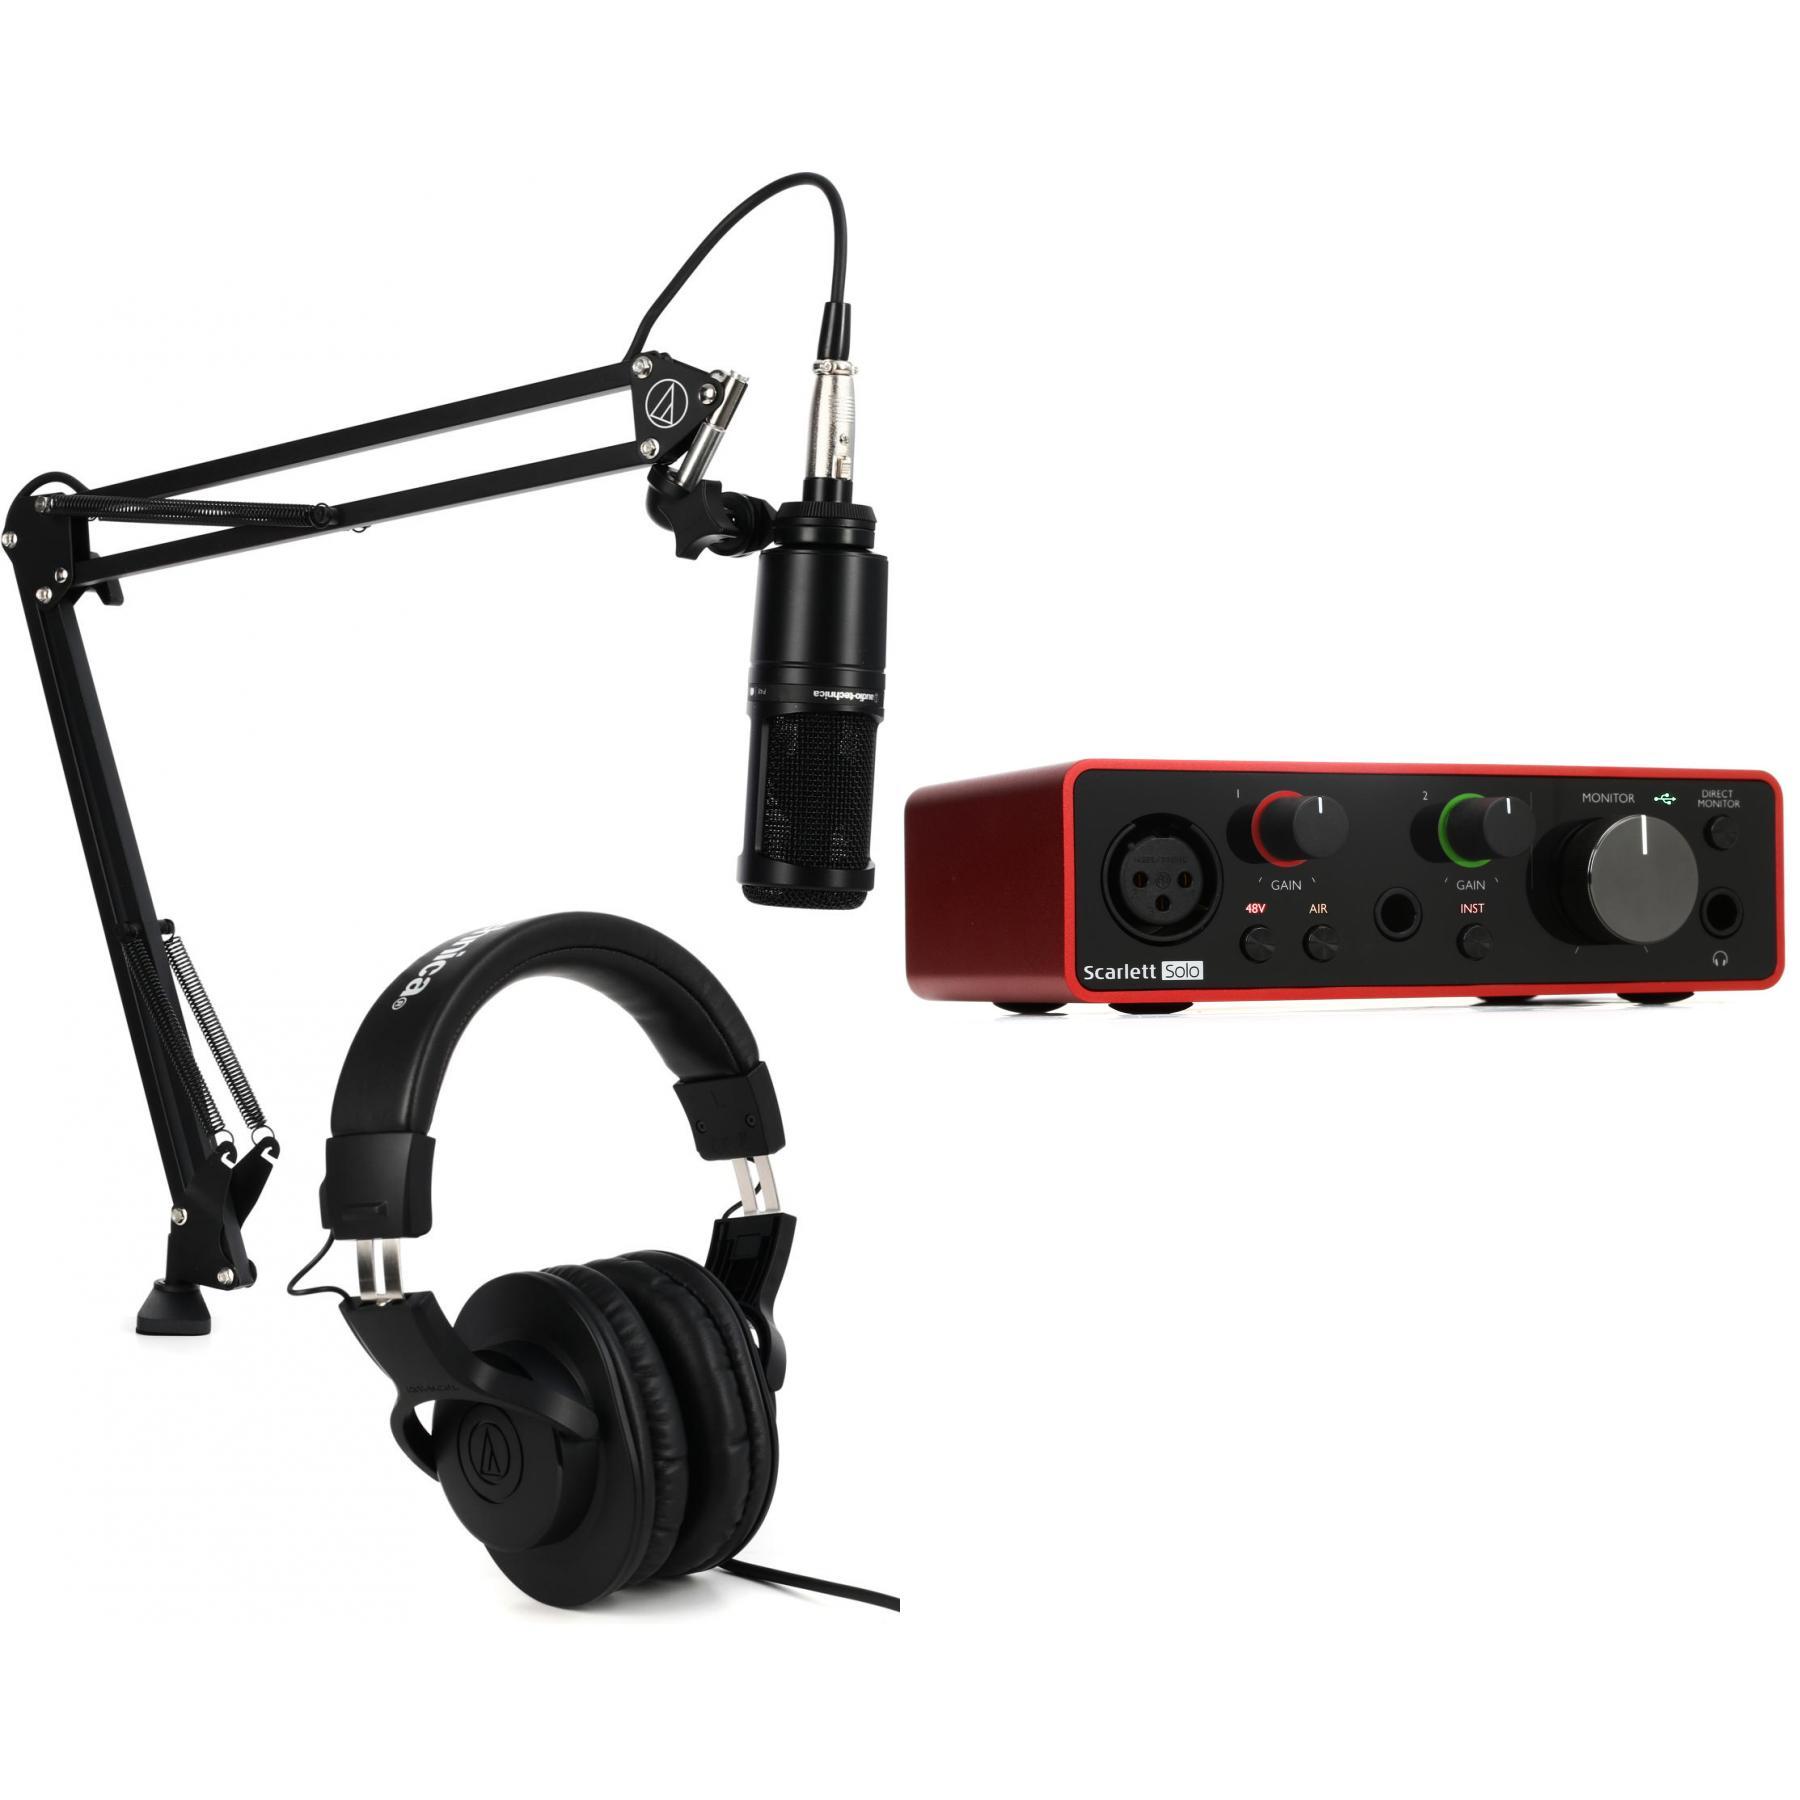 ATH-M20x,　AT2020PK　Studio　USB　Audio　PreSonus　Interface　Cable　Streaming/Podcasting　Pack　with　Microphone　XLR　Boom　グラフィックボード、ビデオカード　Audio　AudioBox　96　Technica　and　with